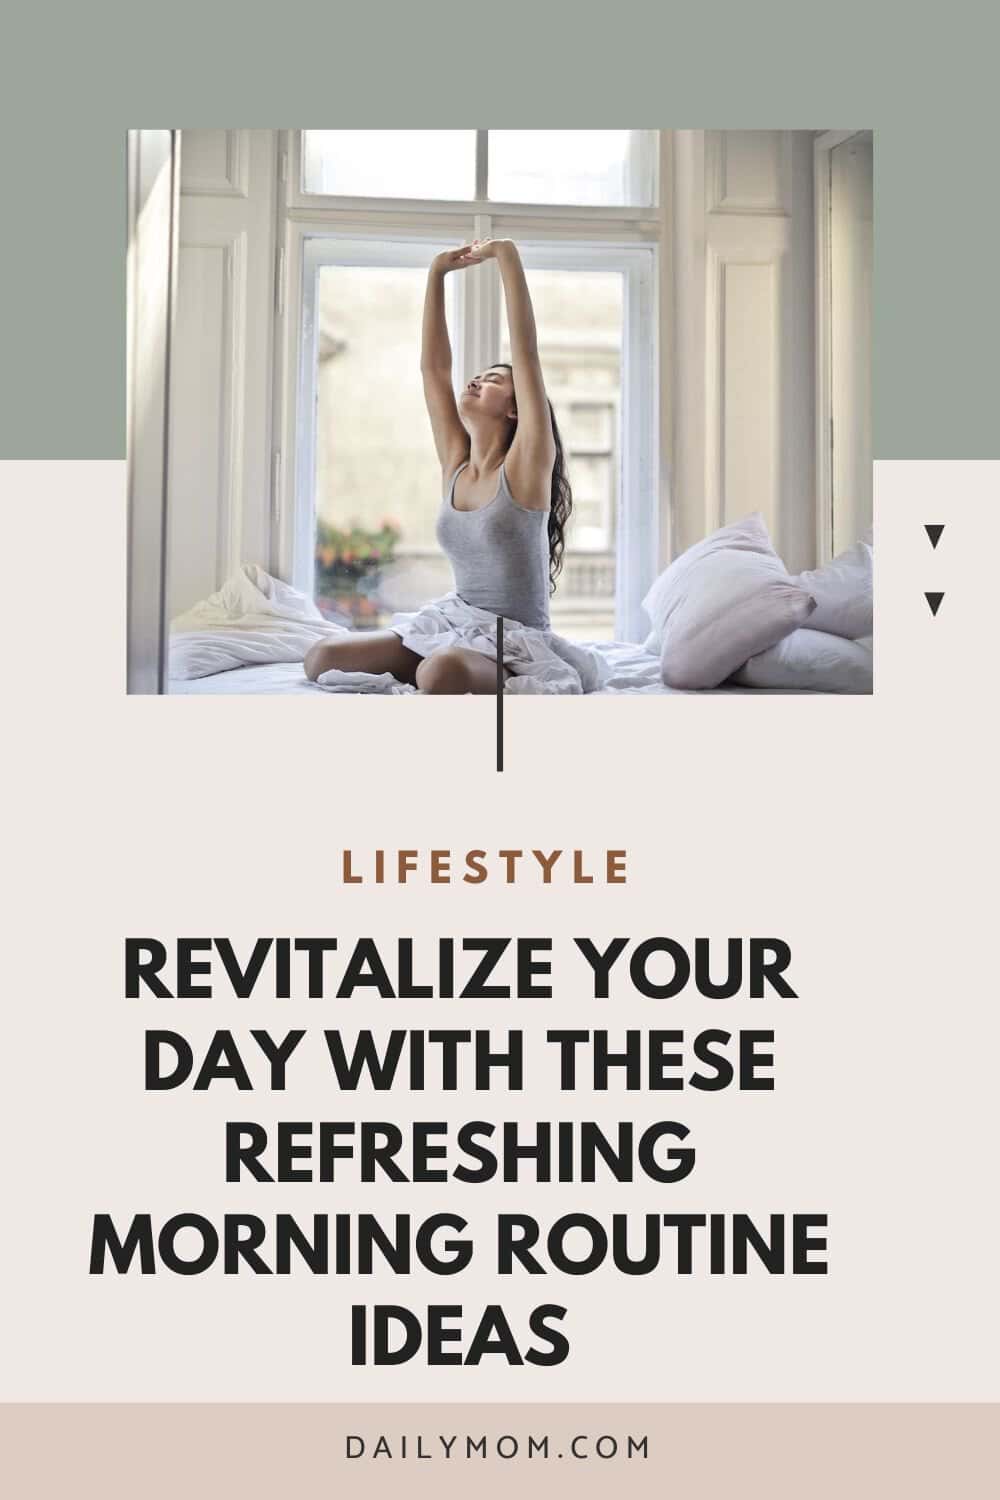 The Best Morning Routine Ideas to Start Your Day and Maximize Productivity  4 Daily Mom, Magazine for Families